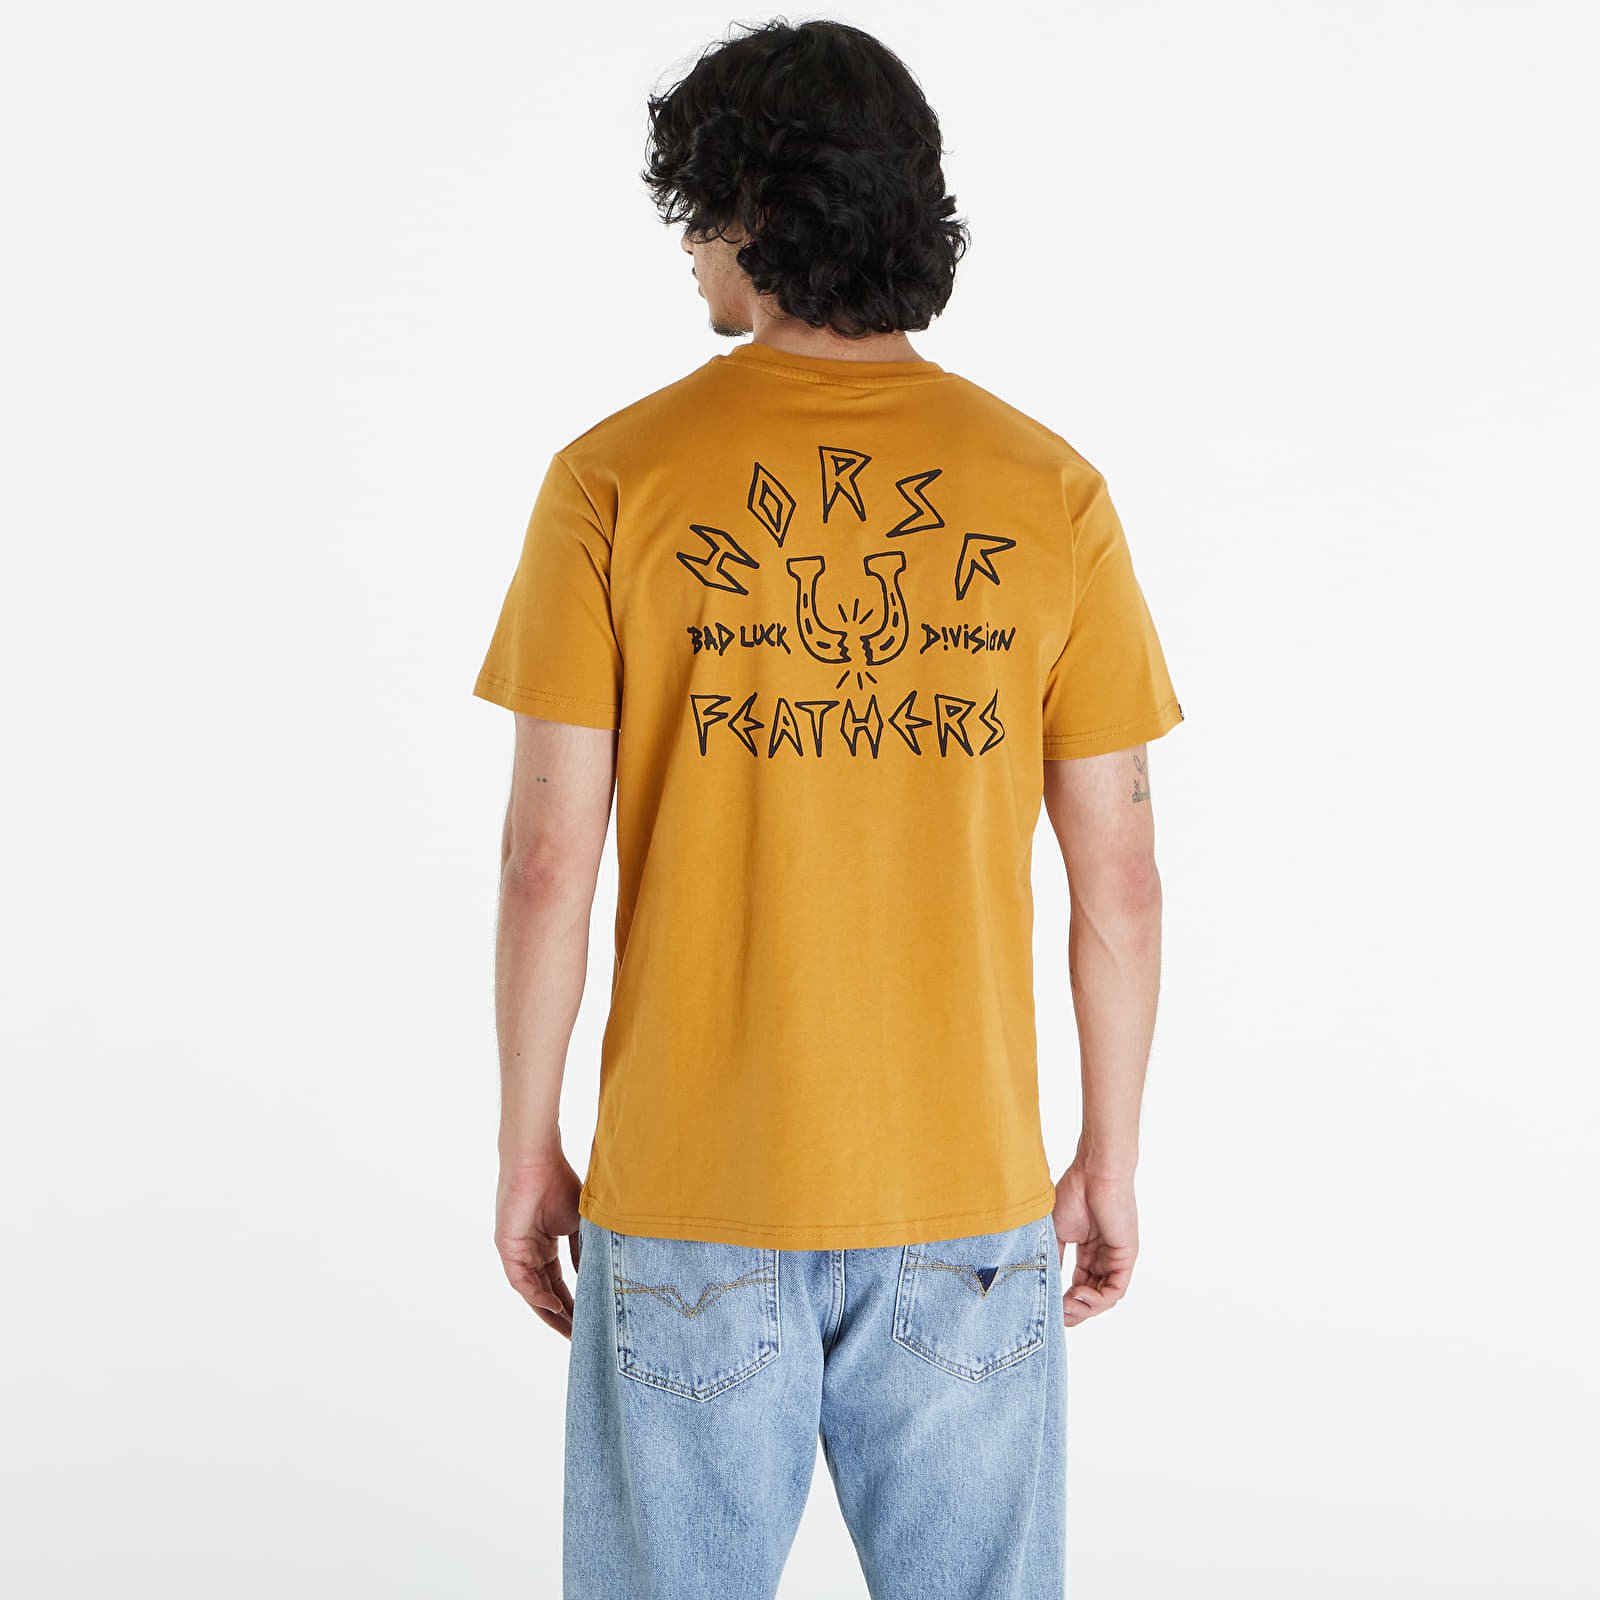 Bad Luck T-Shirt Spruce Yellow